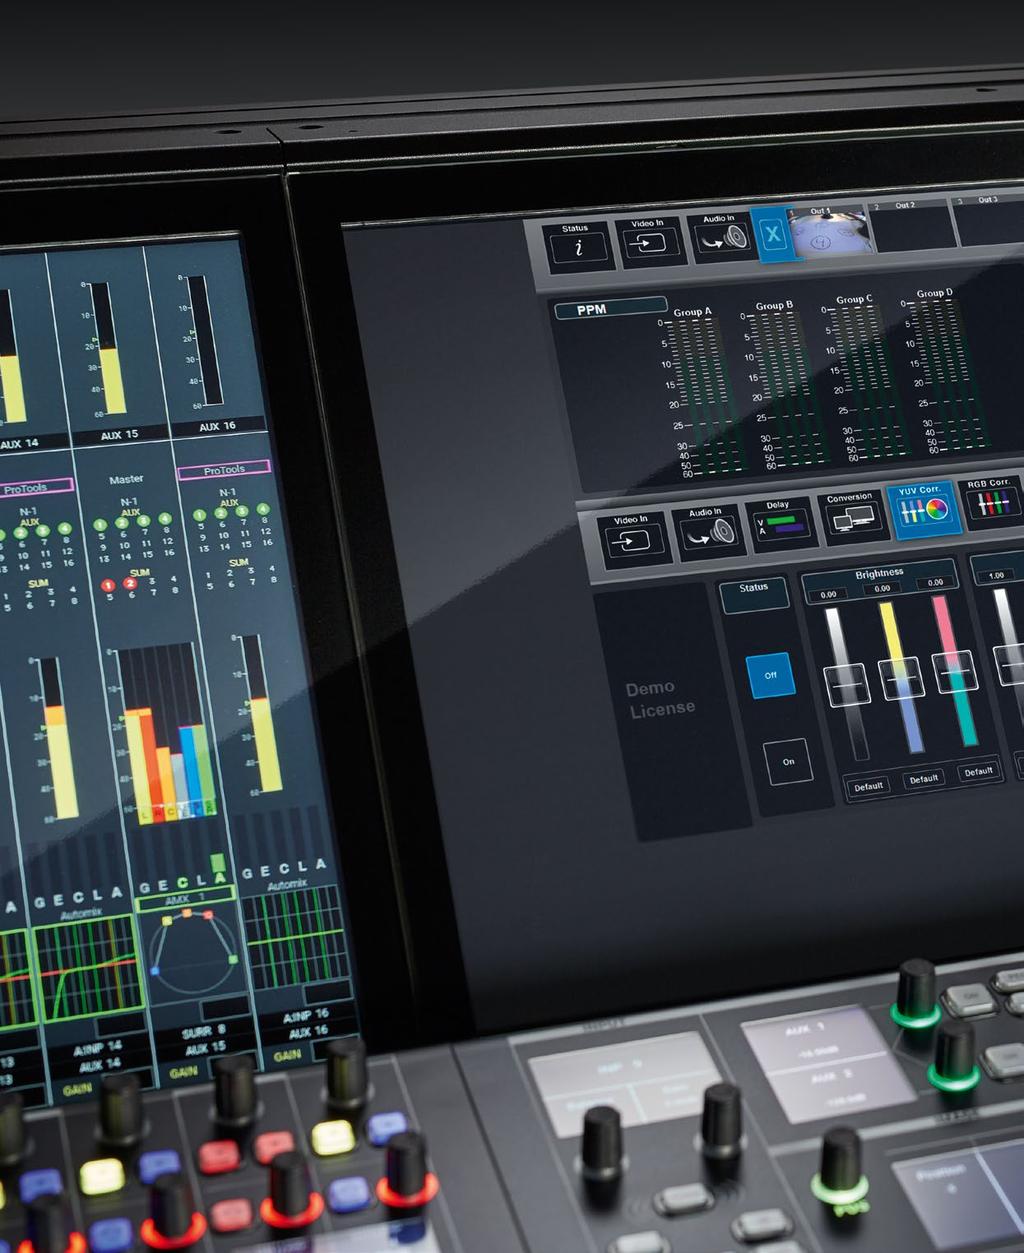 HIGHLIGHTS FEATURES AUTOMATED MIXING ASSISTANTS The mc 2 96 s automated mixing capabilities include an Automix function that can automatically adjust the Ievels of active and inactive microphones,